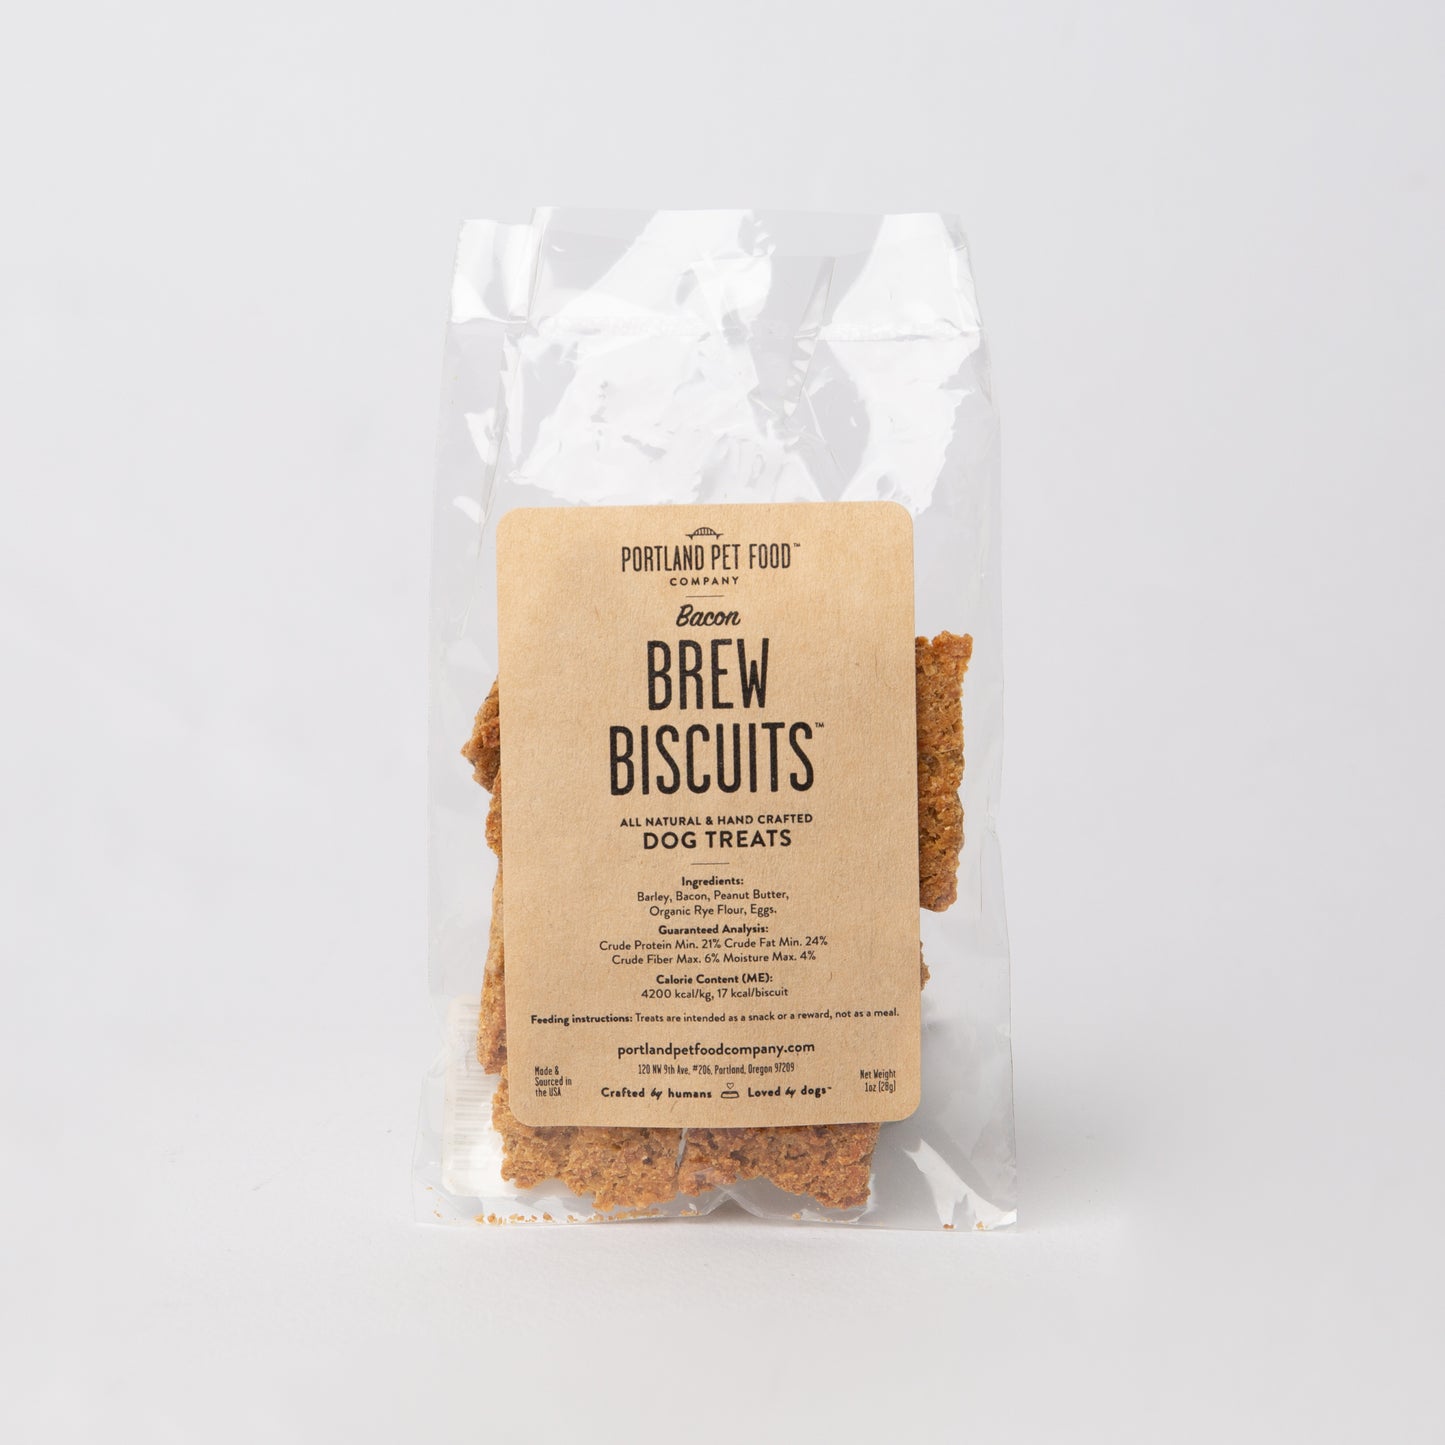 Bacon Brew Dog Biscuits (1 oz)